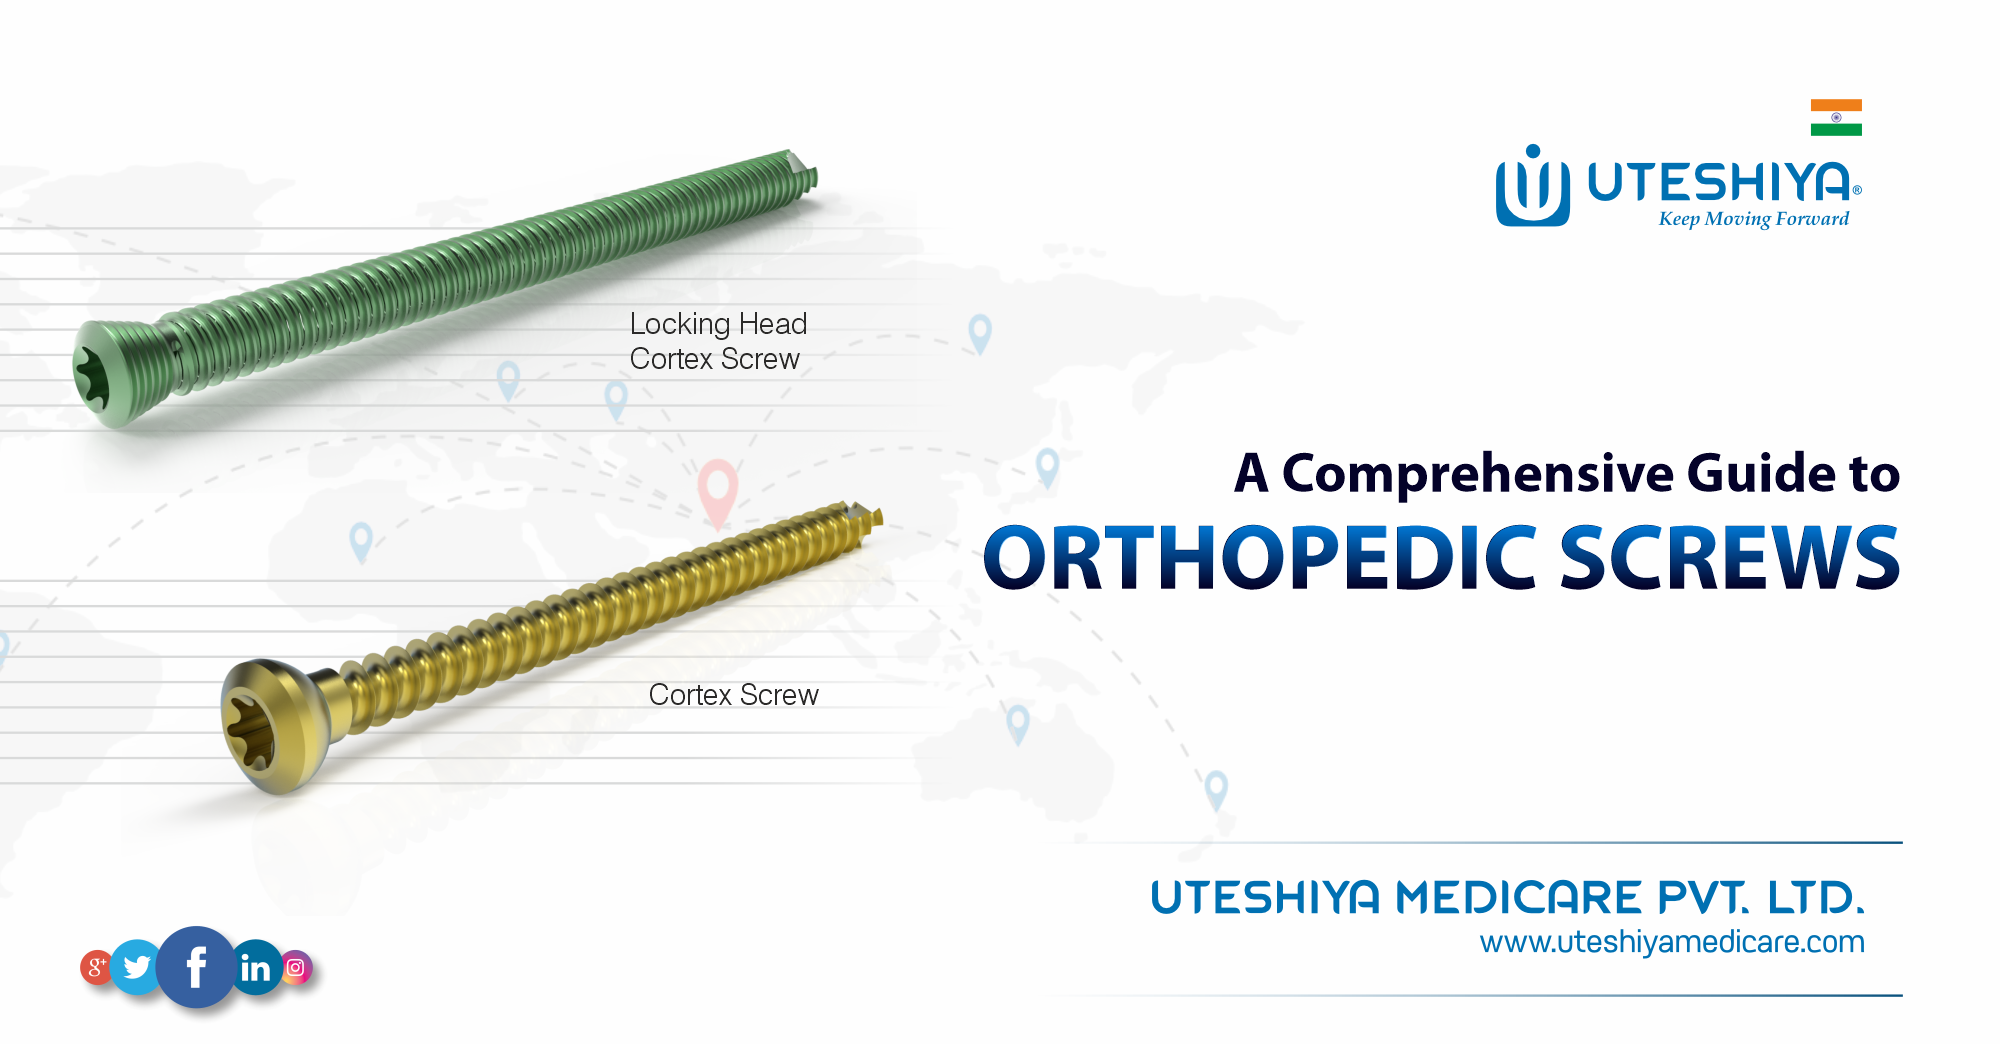 A Comprehensive Guide to Orthopedic Screws